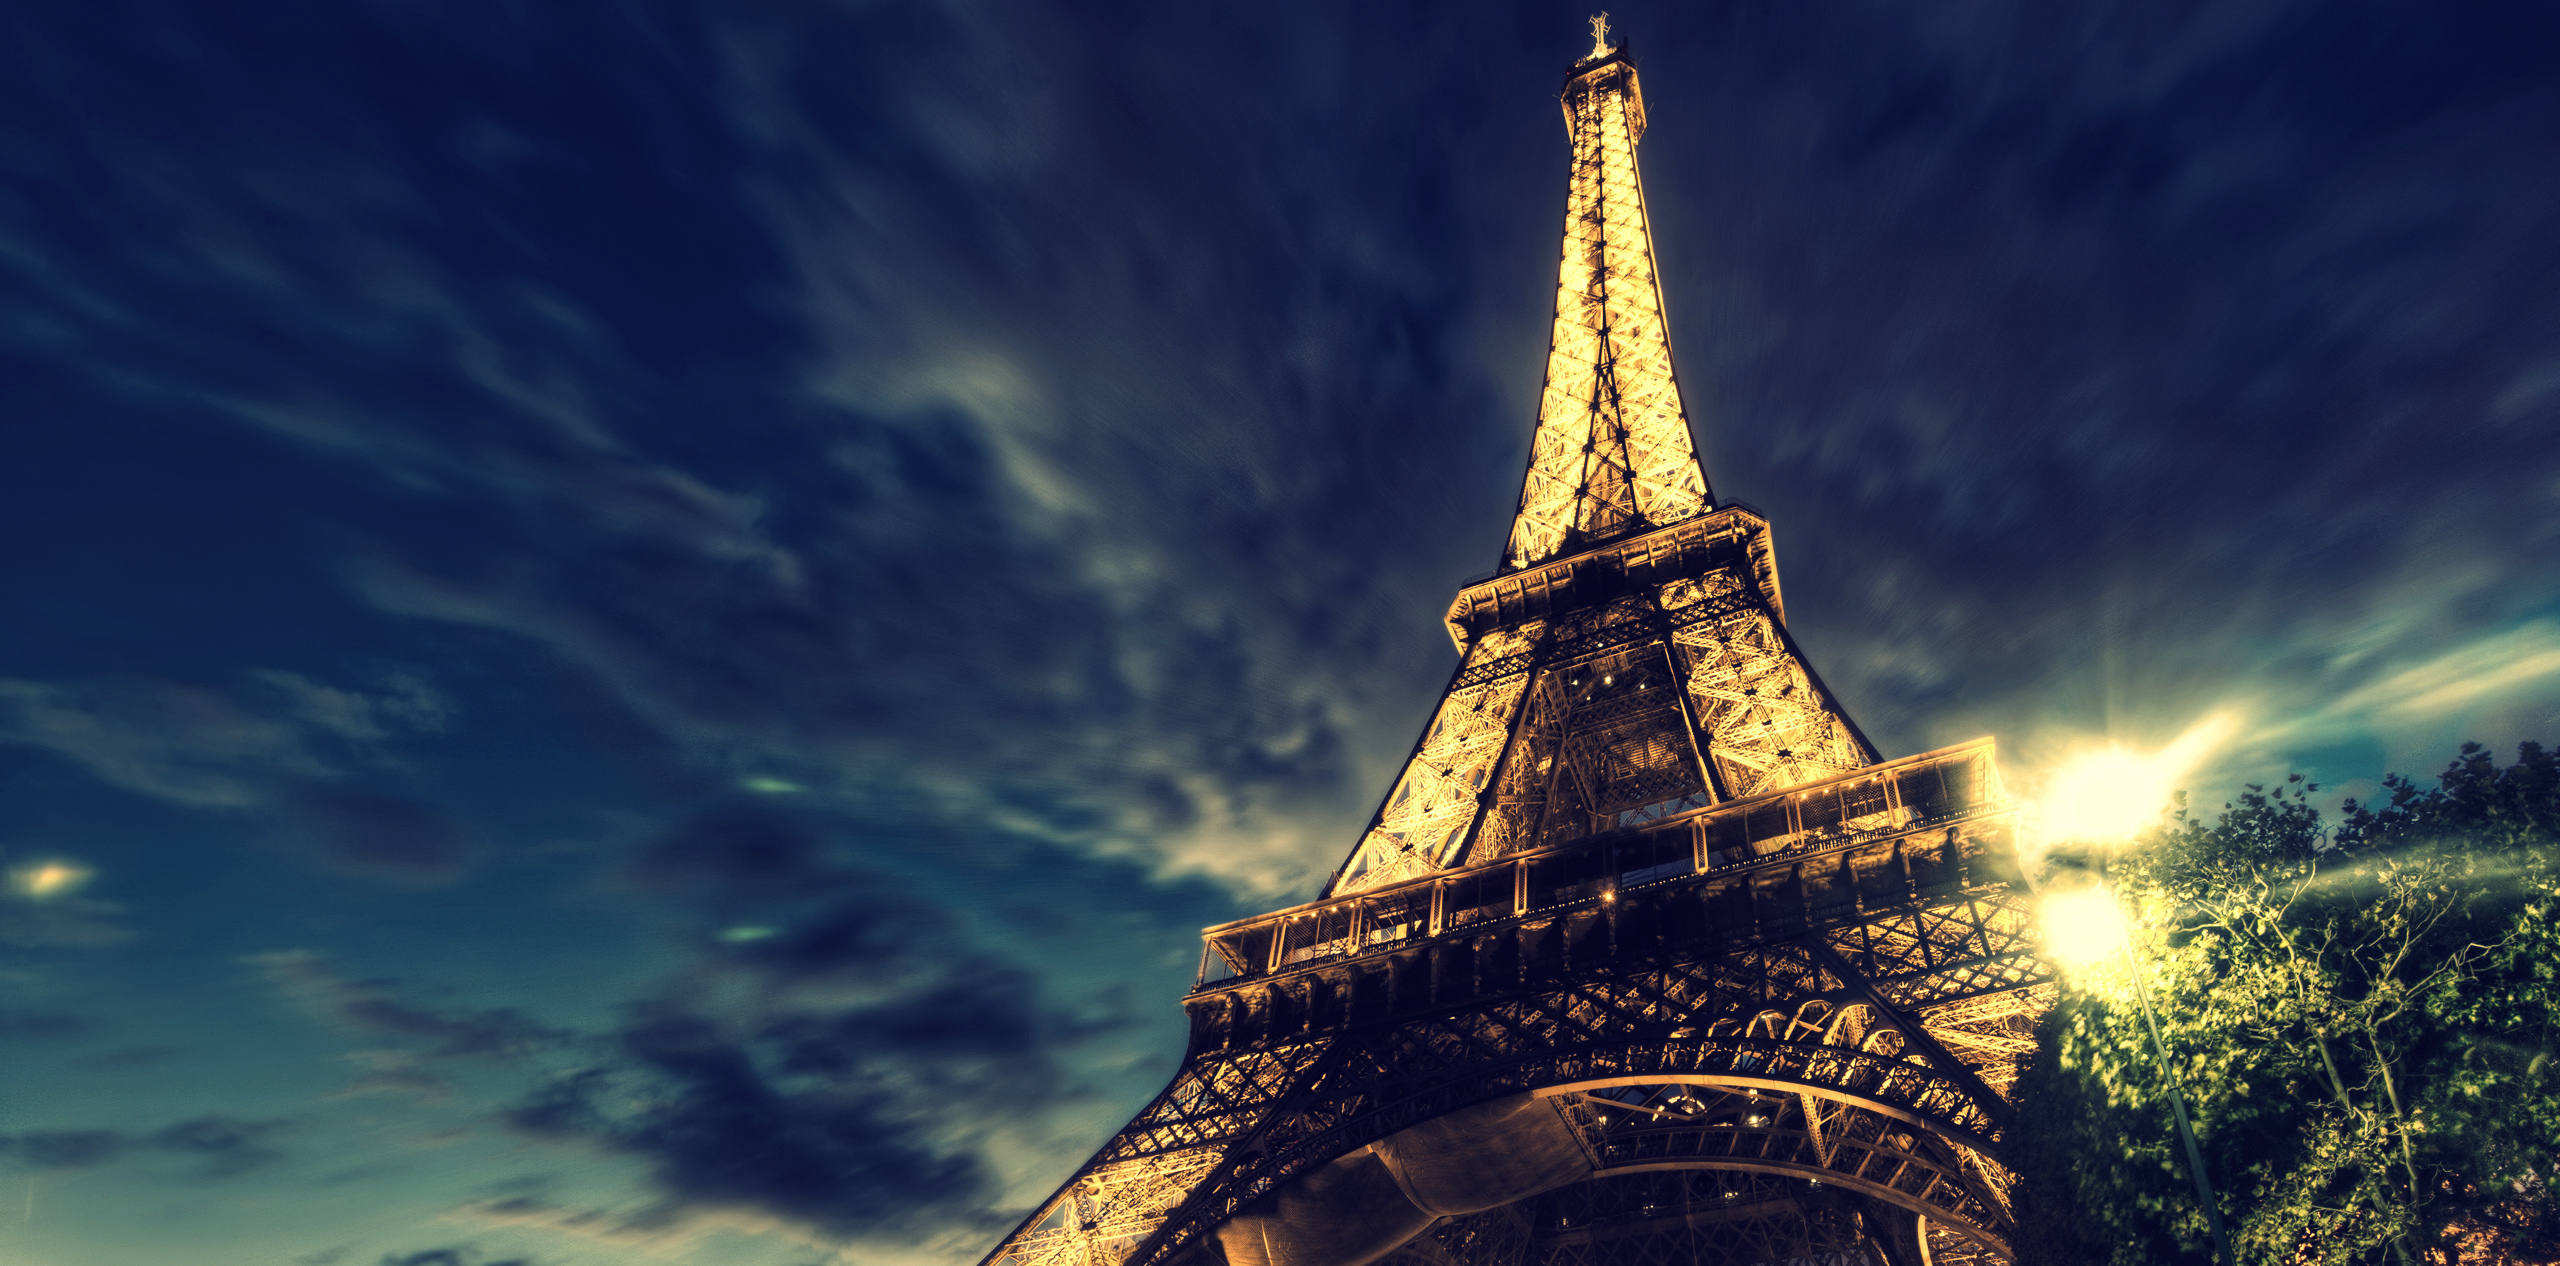 Eiffel Tower On Background Of Blue Night Sky Wallpaper And Image